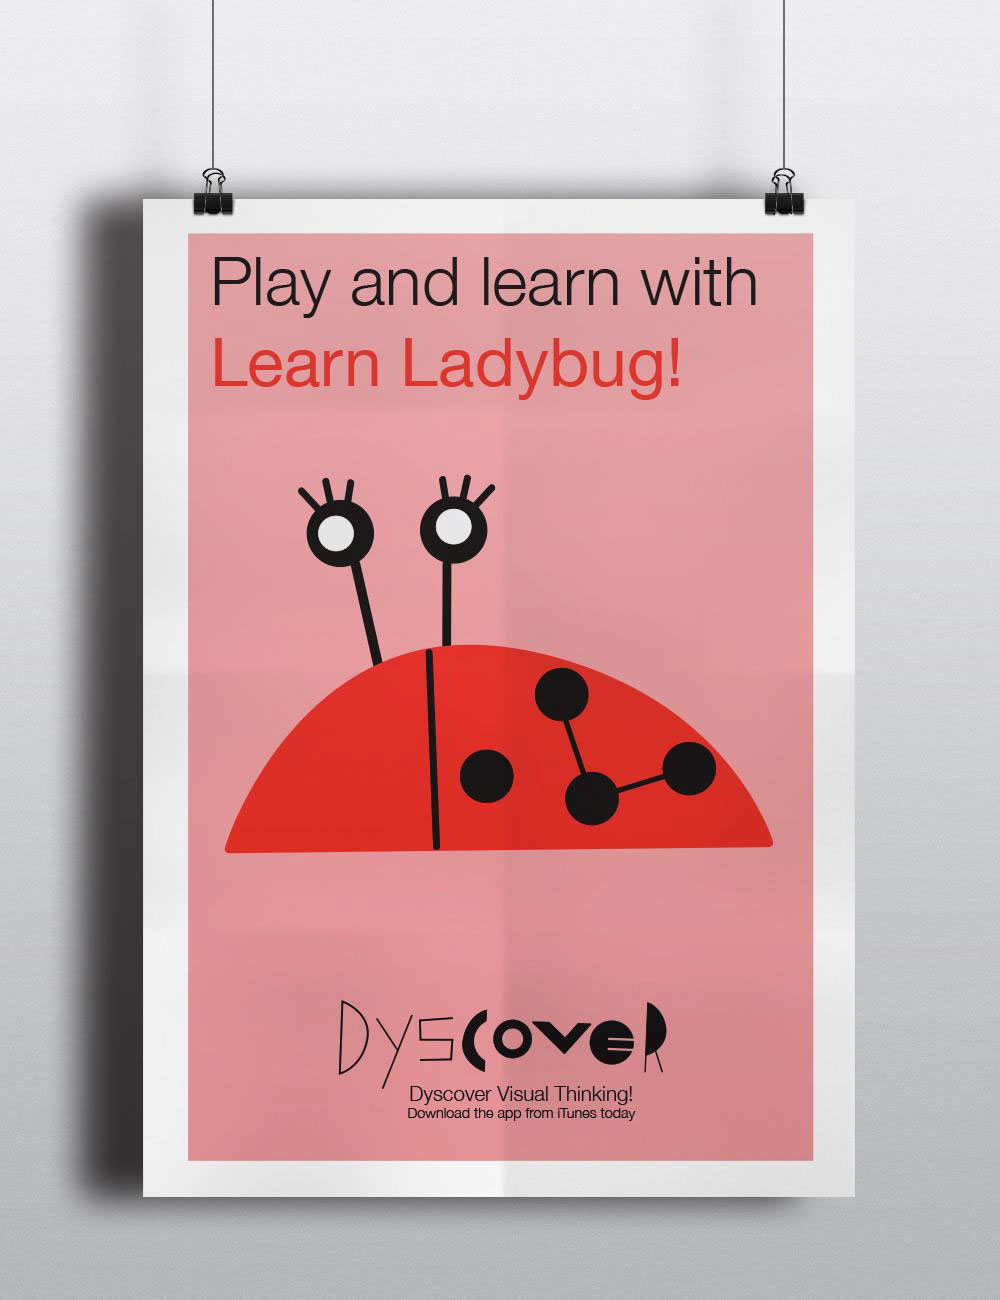 dyslexia discovery Games creative characters app shapes canvas Cat ladybug bird words letterforms Typeface letter design